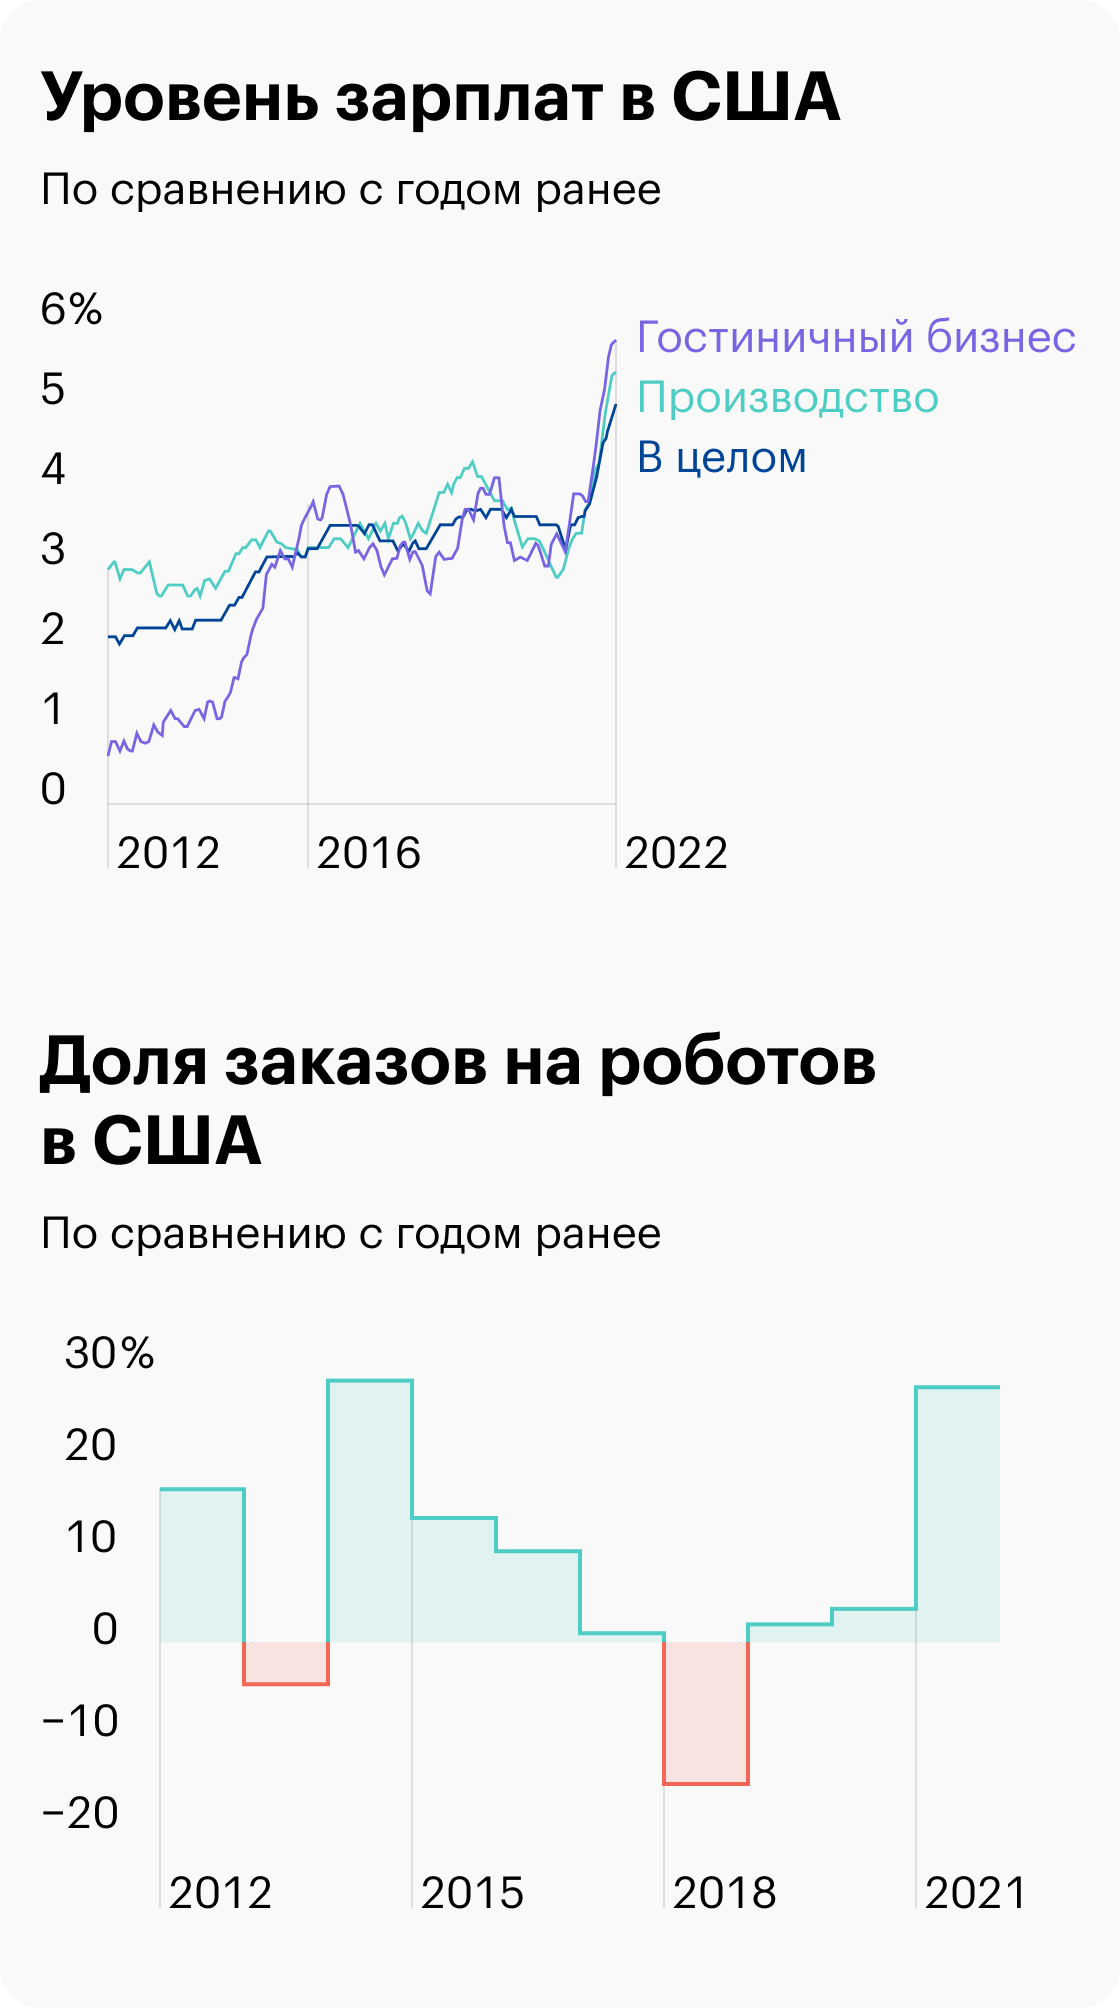 Источник: Daily Shot, Robot orders have increased